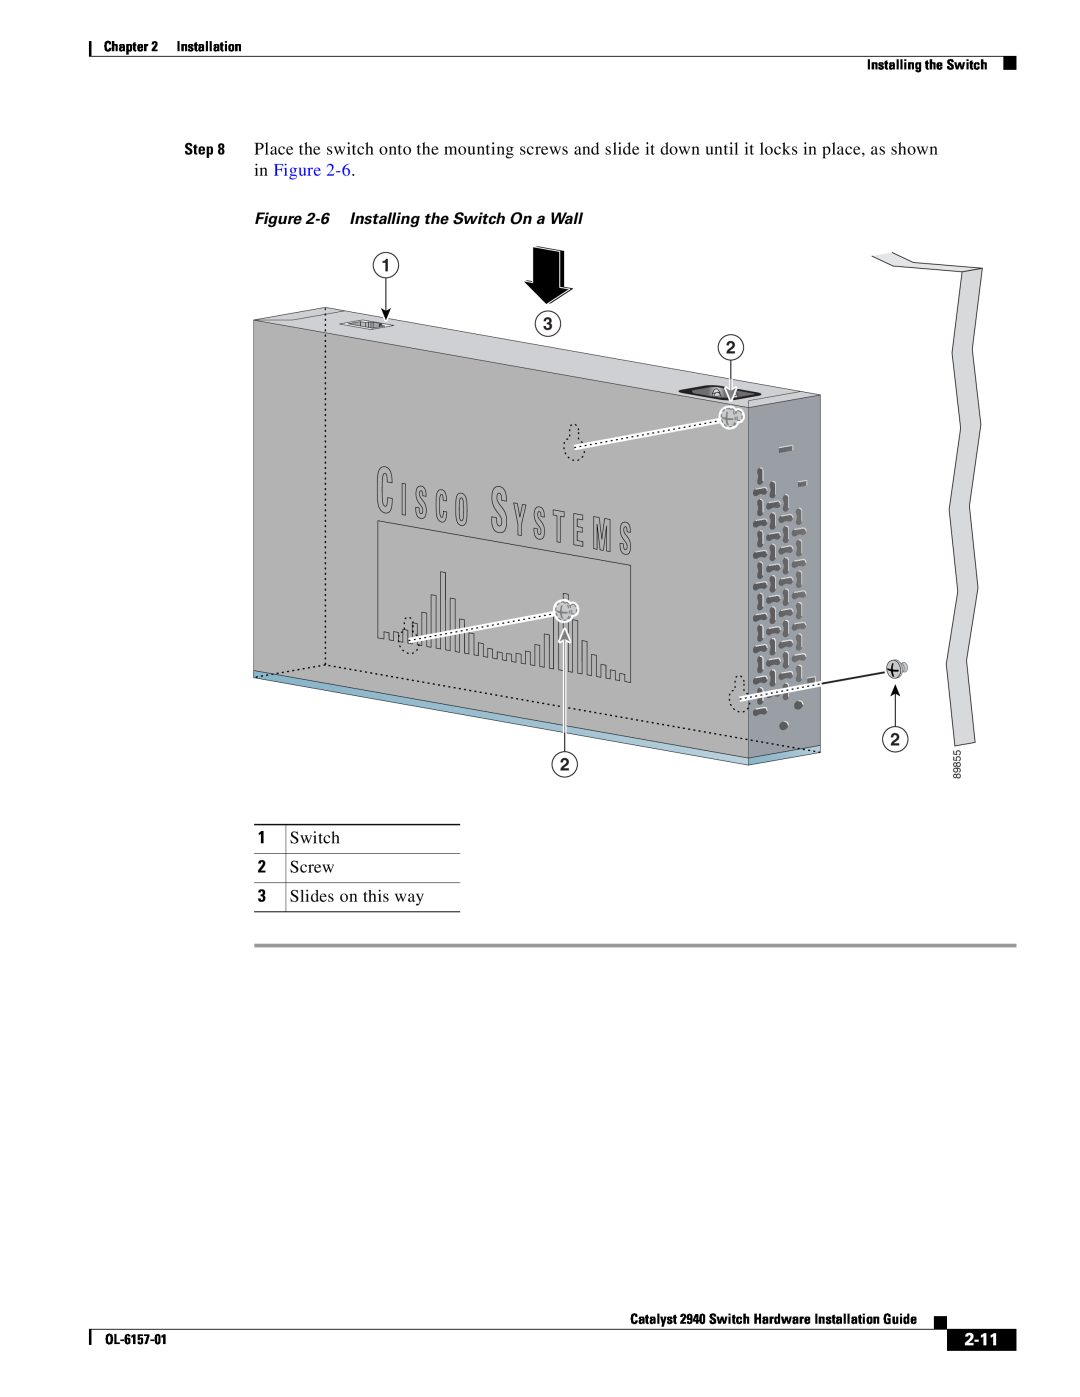 Cisco Systems OL-6157-01 manual 2-11, 6 Installing the Switch On a Wall, Installation Installing the Switch, 89855 